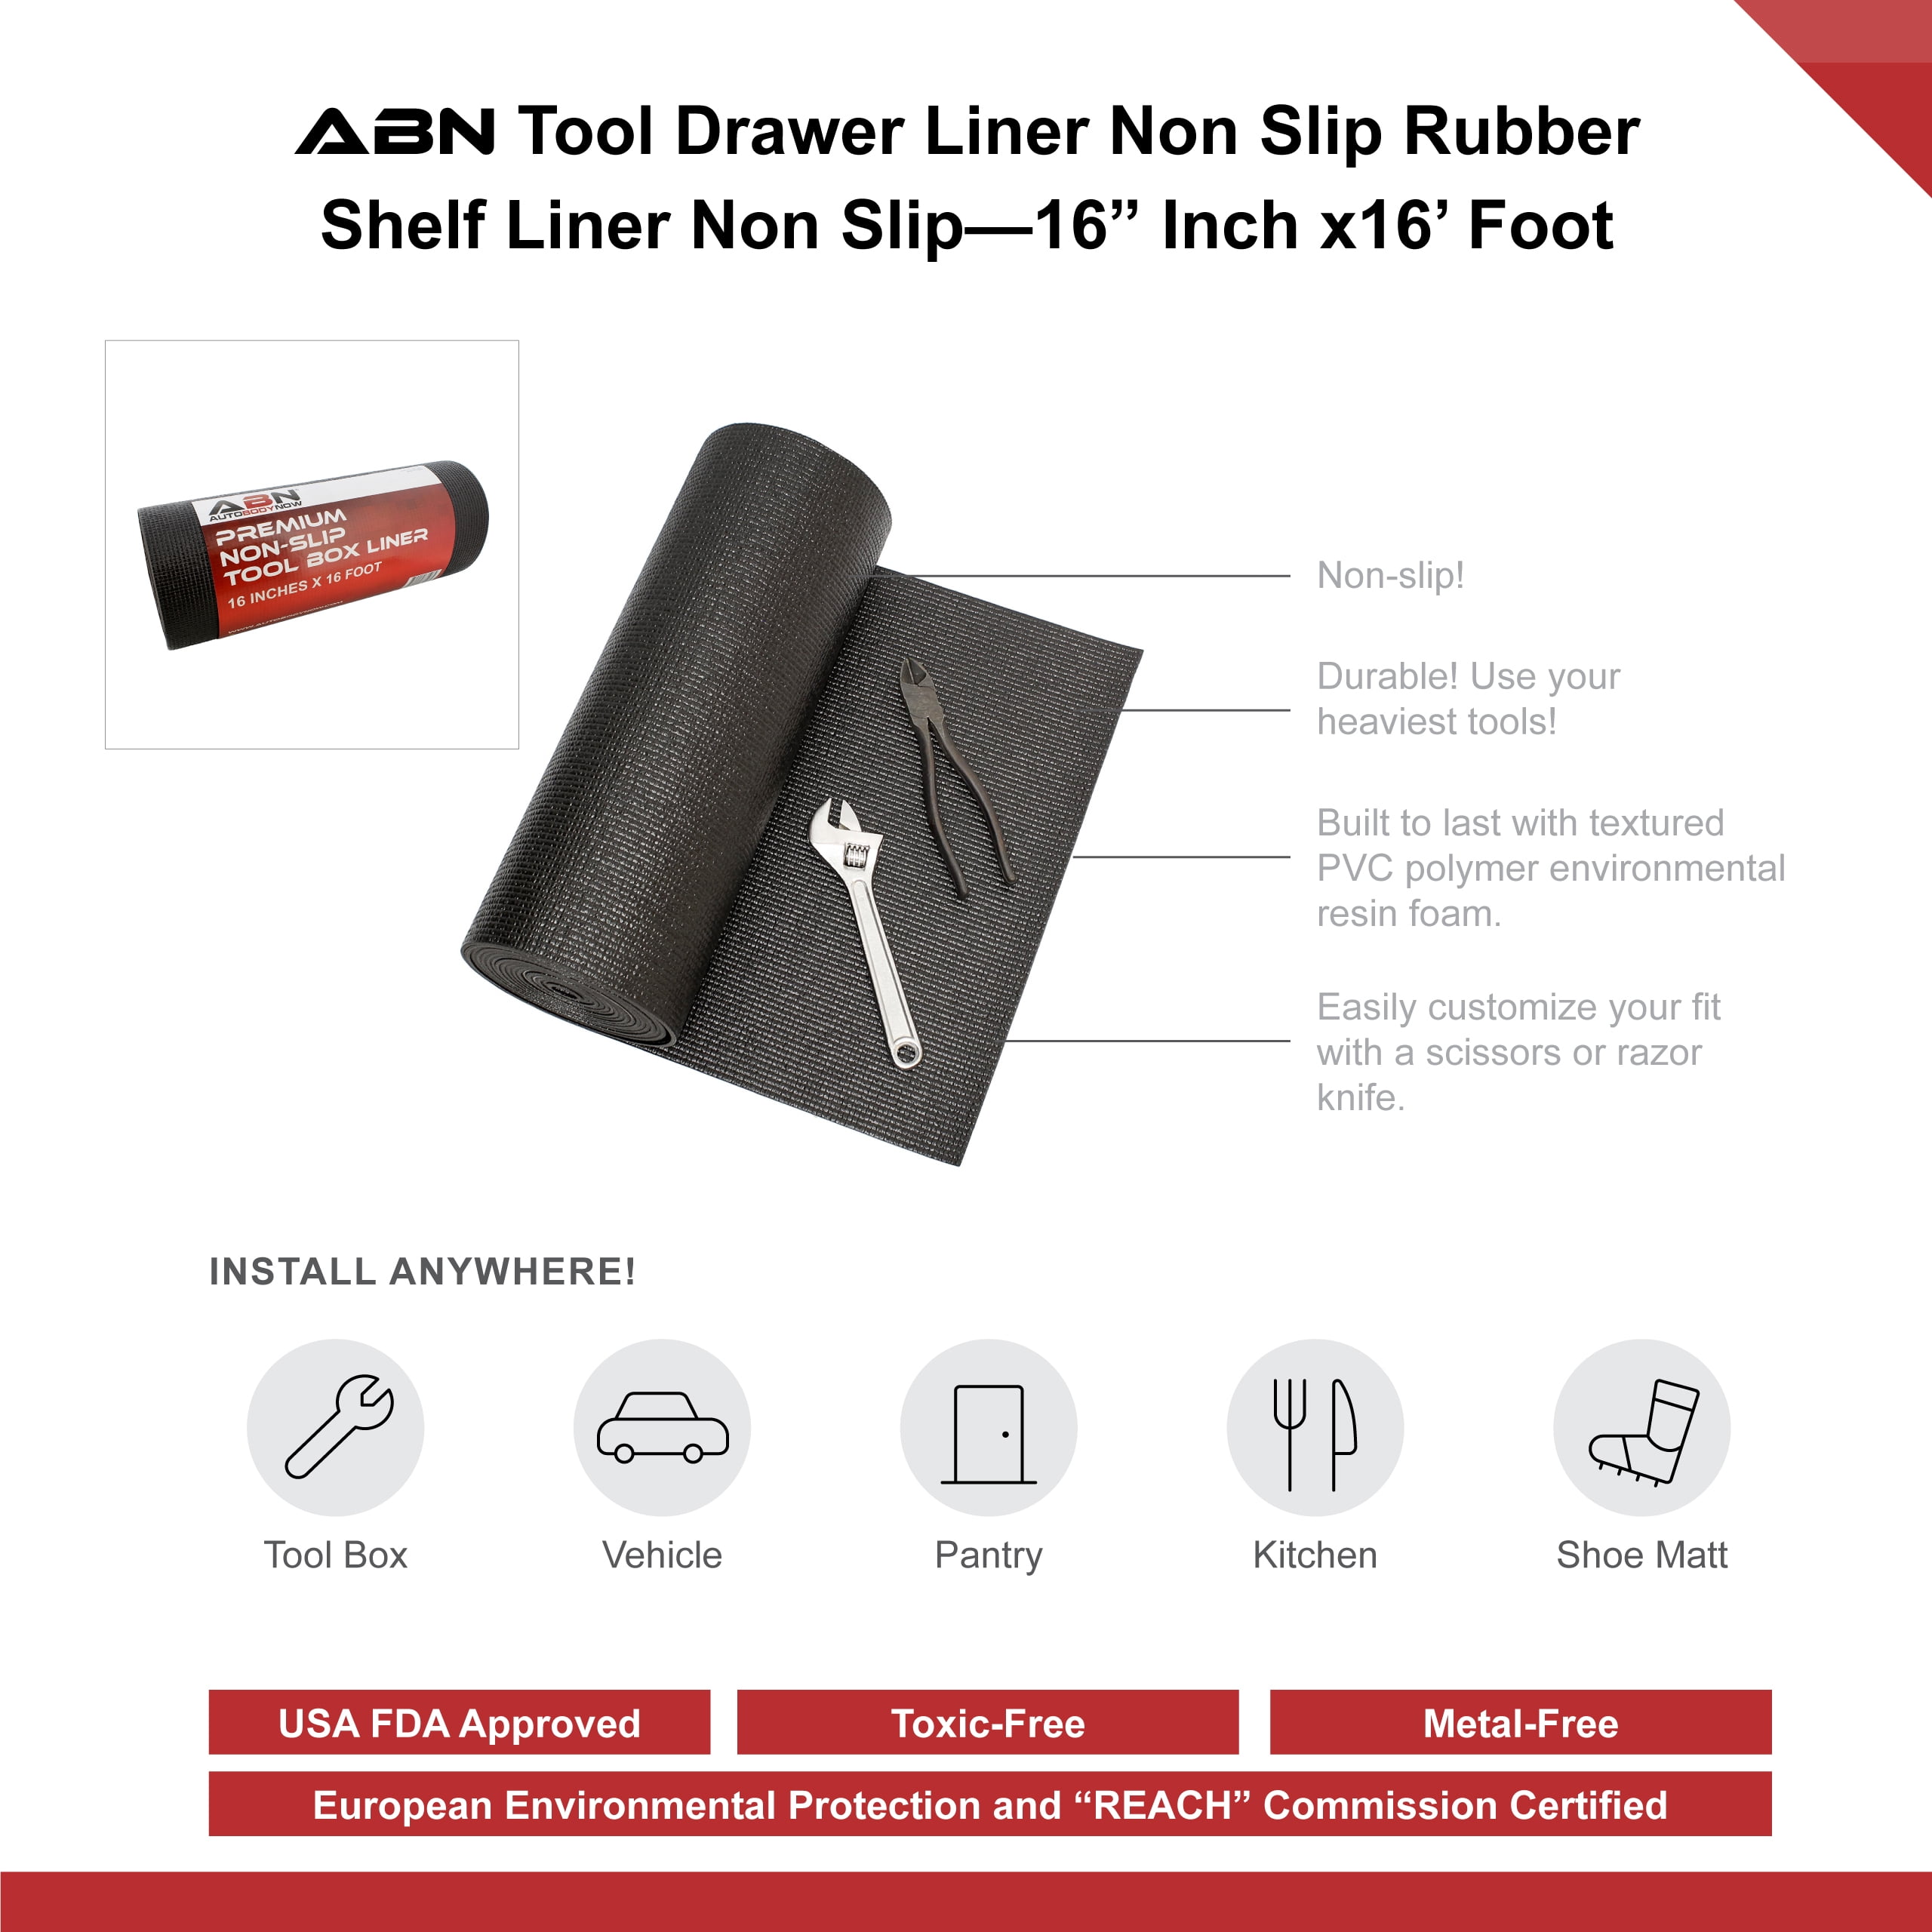 ABN Tool Drawer Liner Non Slip Rubber Shelf Liner Non Adhesive - 16in x 6ft